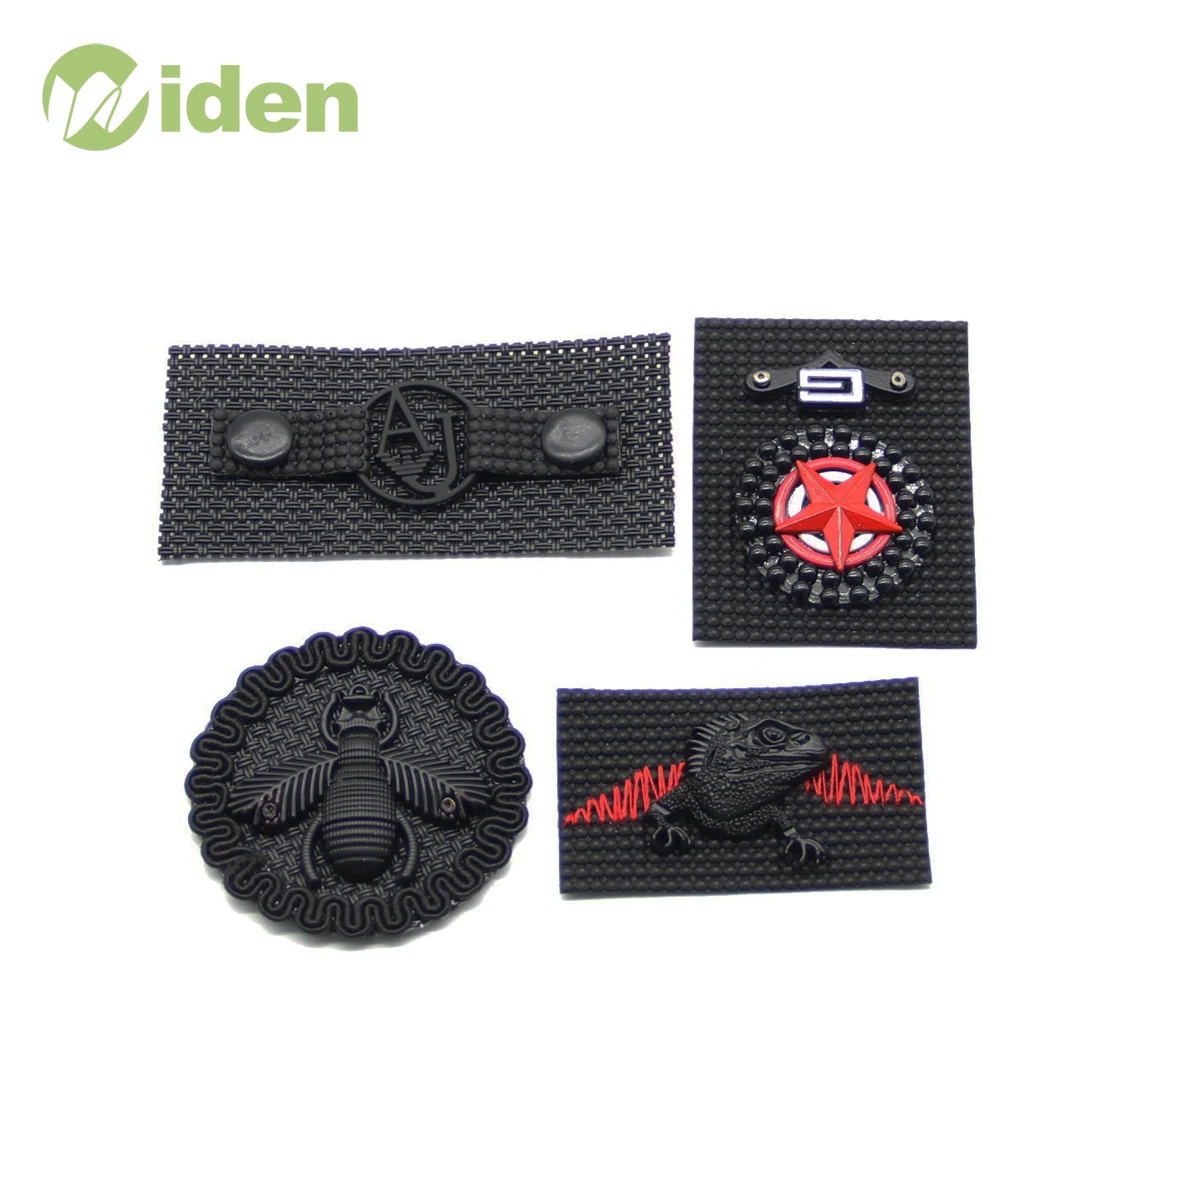 3D Insect Design Ruffles Metal Accessories Applique Clothing Patches